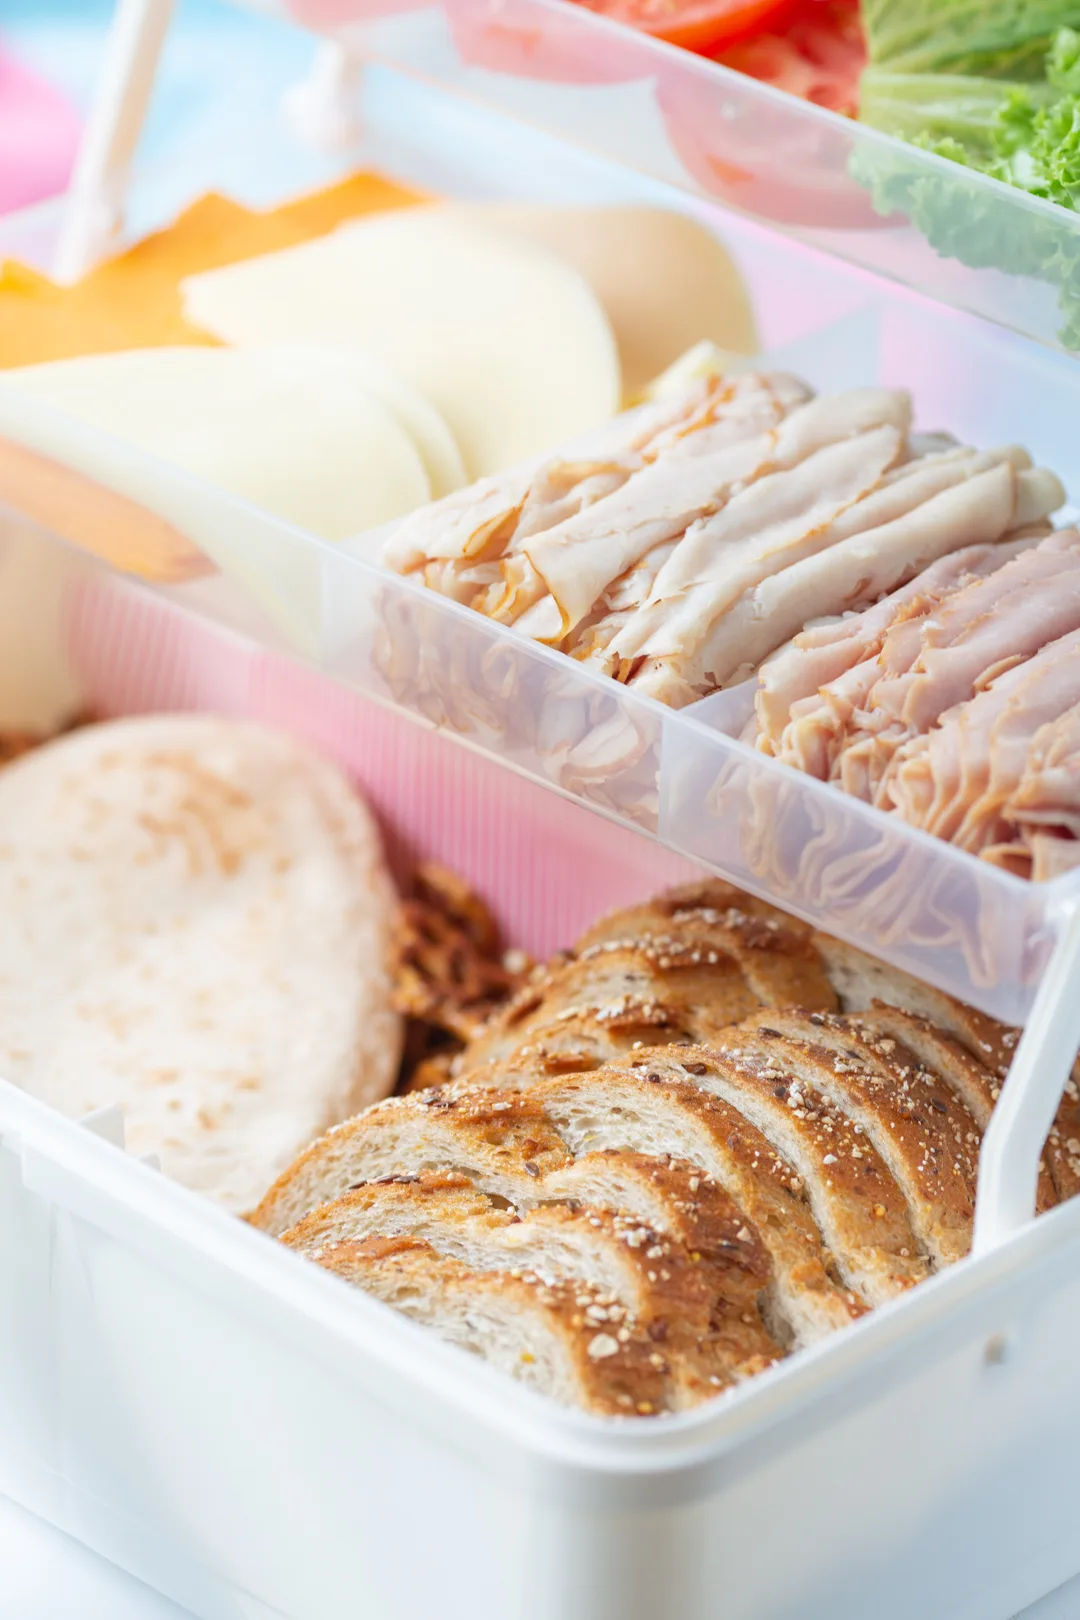 lunch meats and deli cheeses and bread slices set up inside of a sandwich tackle box